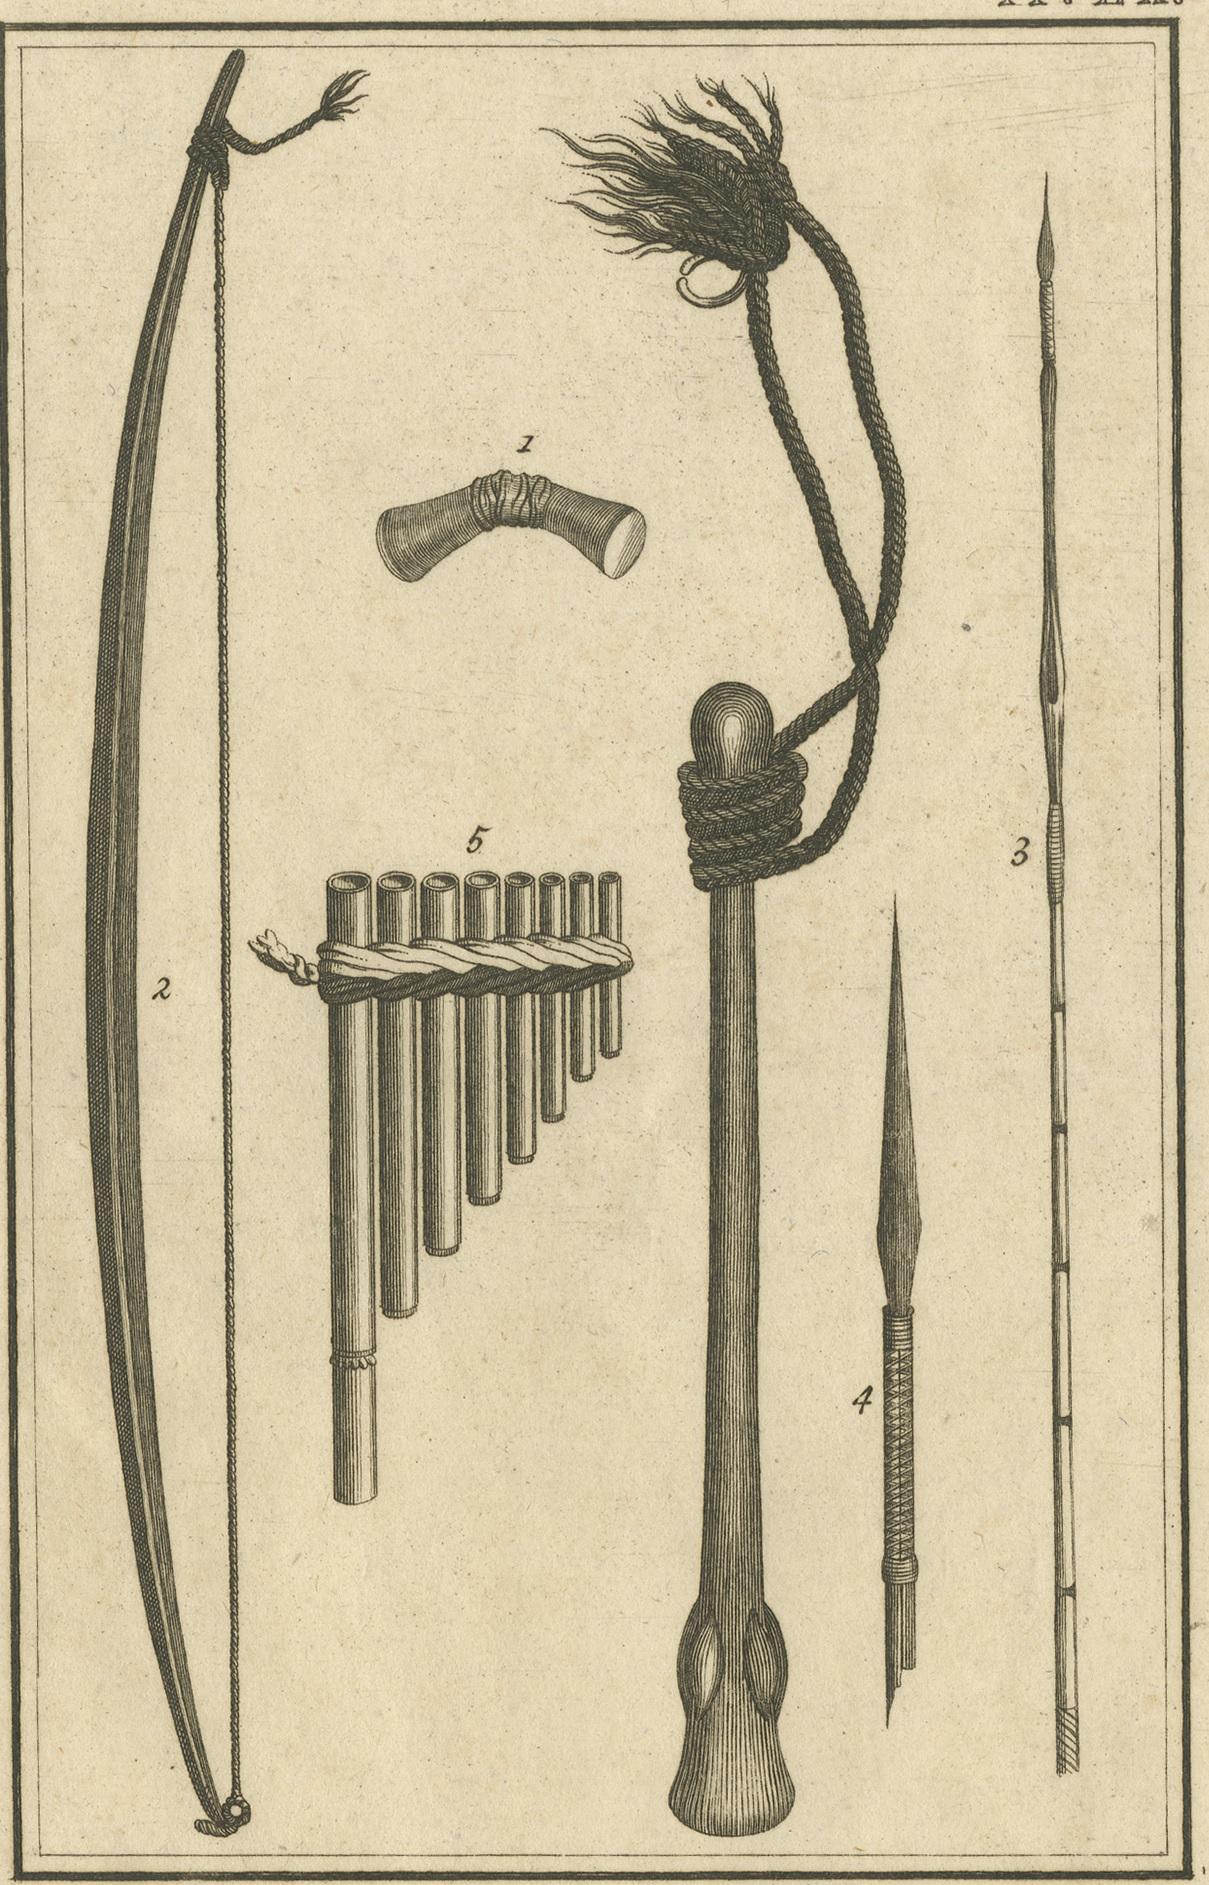 Dutch Antique Print Depicting Tools of the New Hebrides by Cook, 1803 For Sale